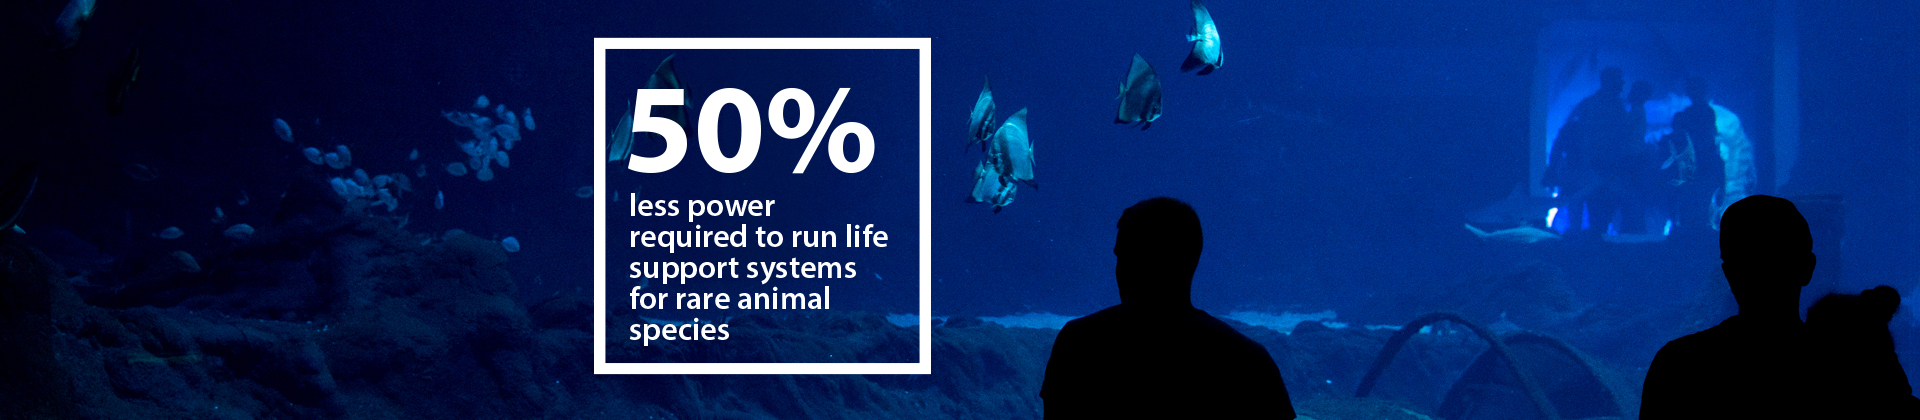 A large aquarium and the words "50% less power required to run life support systems for rare animal species"